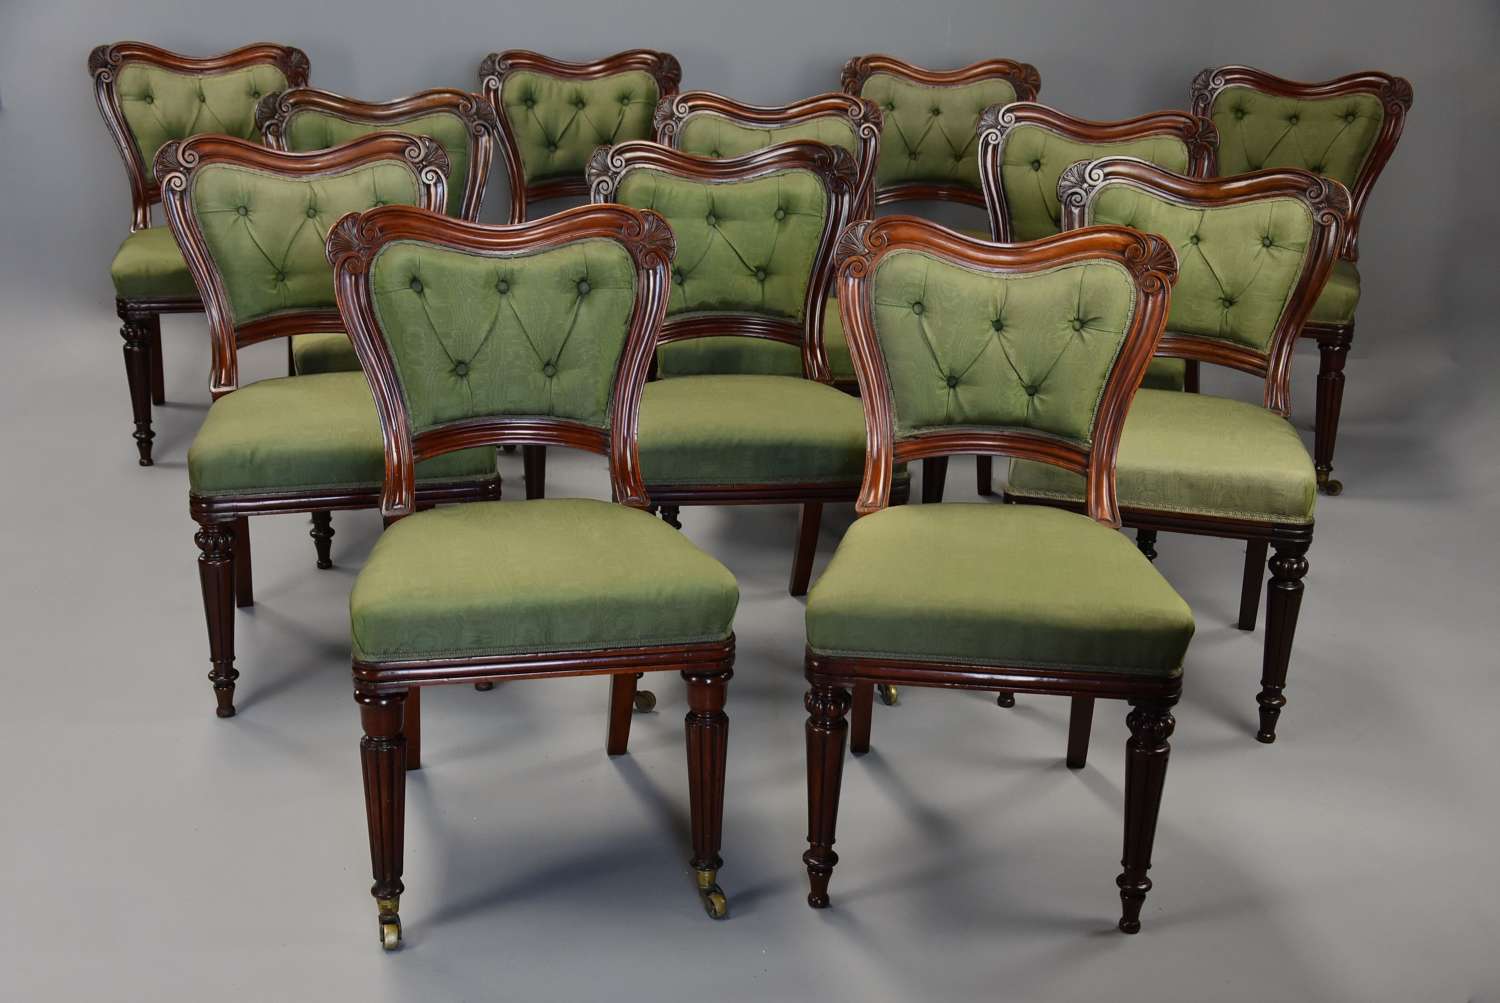 Set of twelve William IVth dining chairs attributed to Gillows